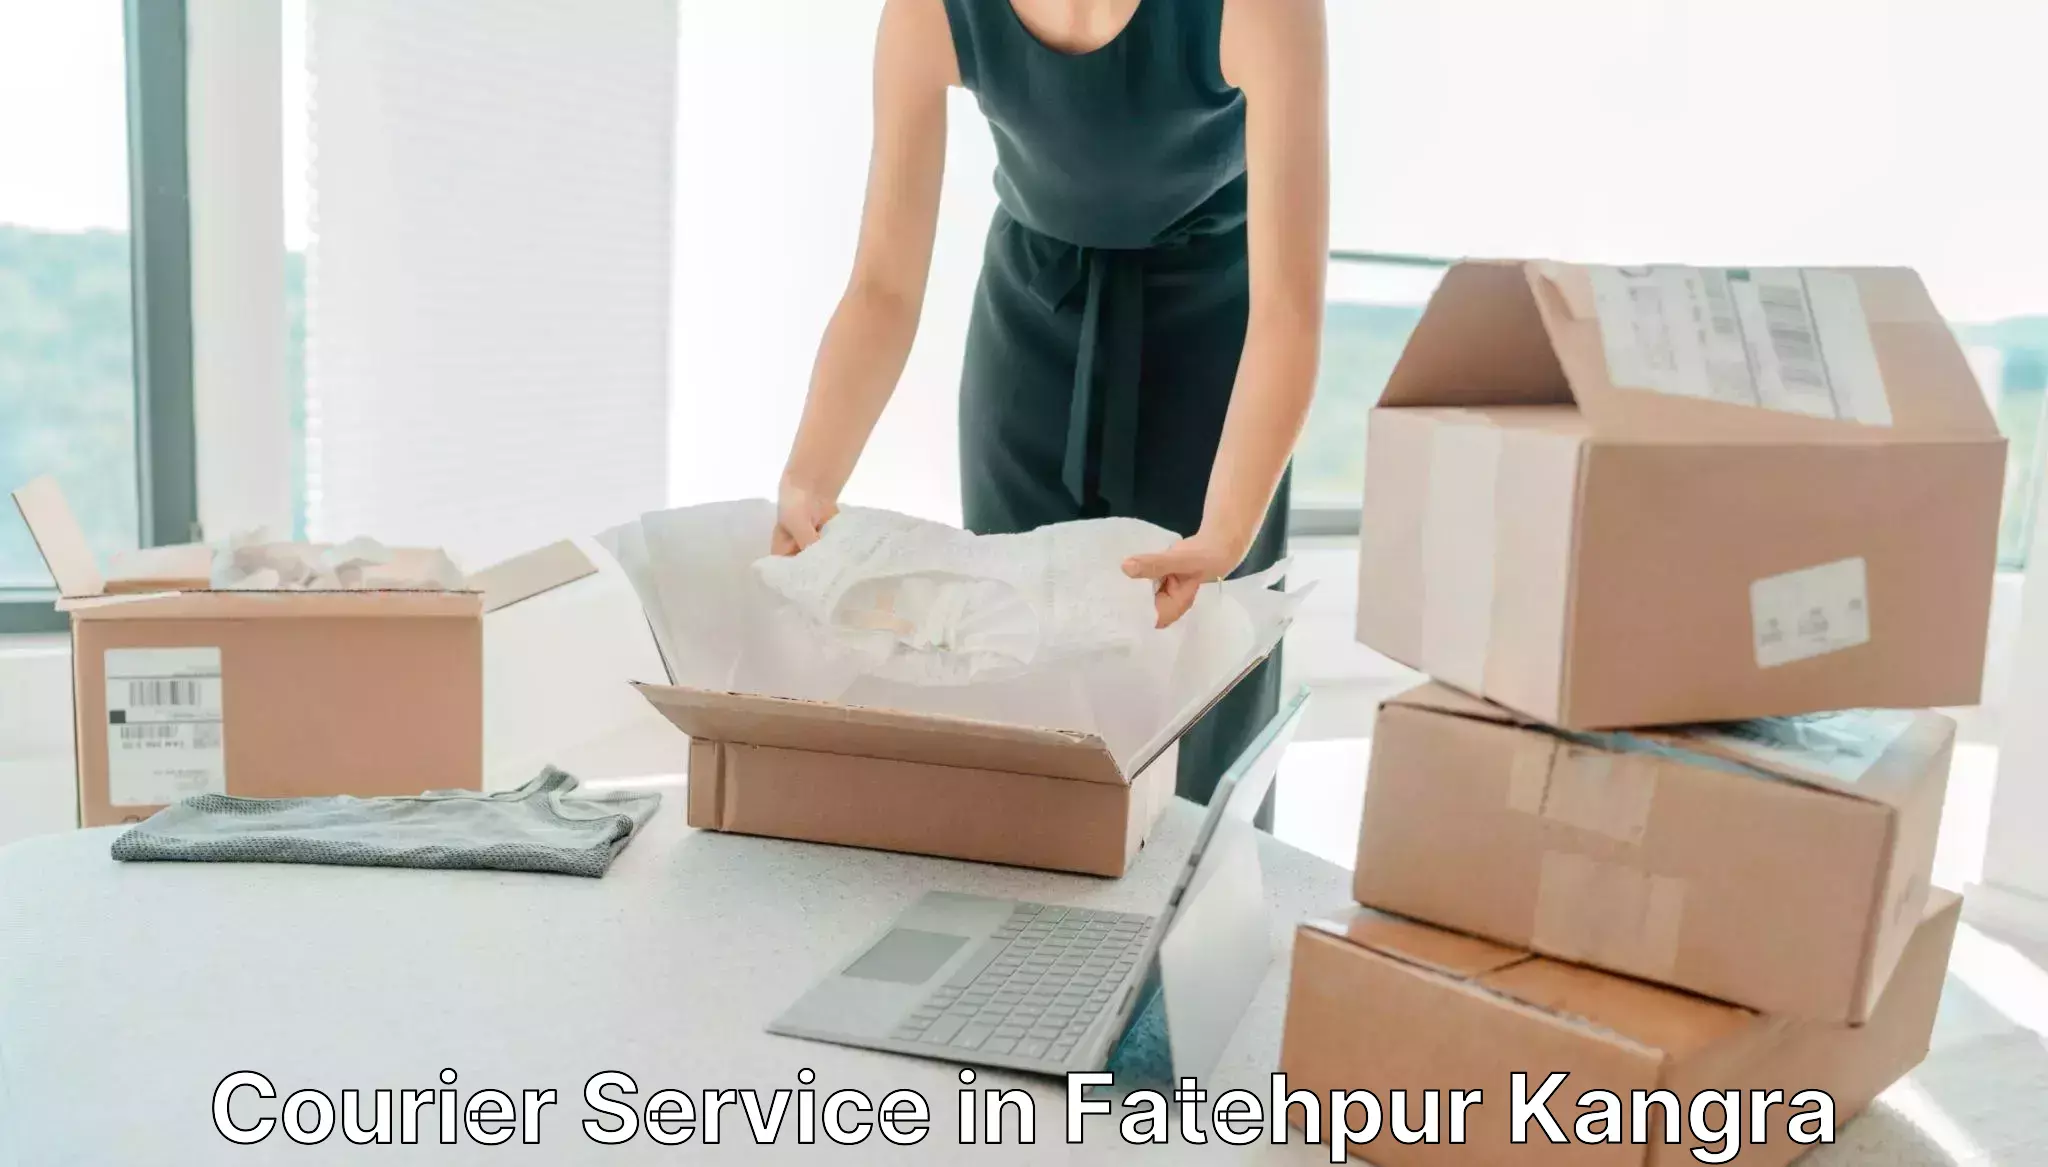 Retail shipping solutions in Fatehpur Kangra